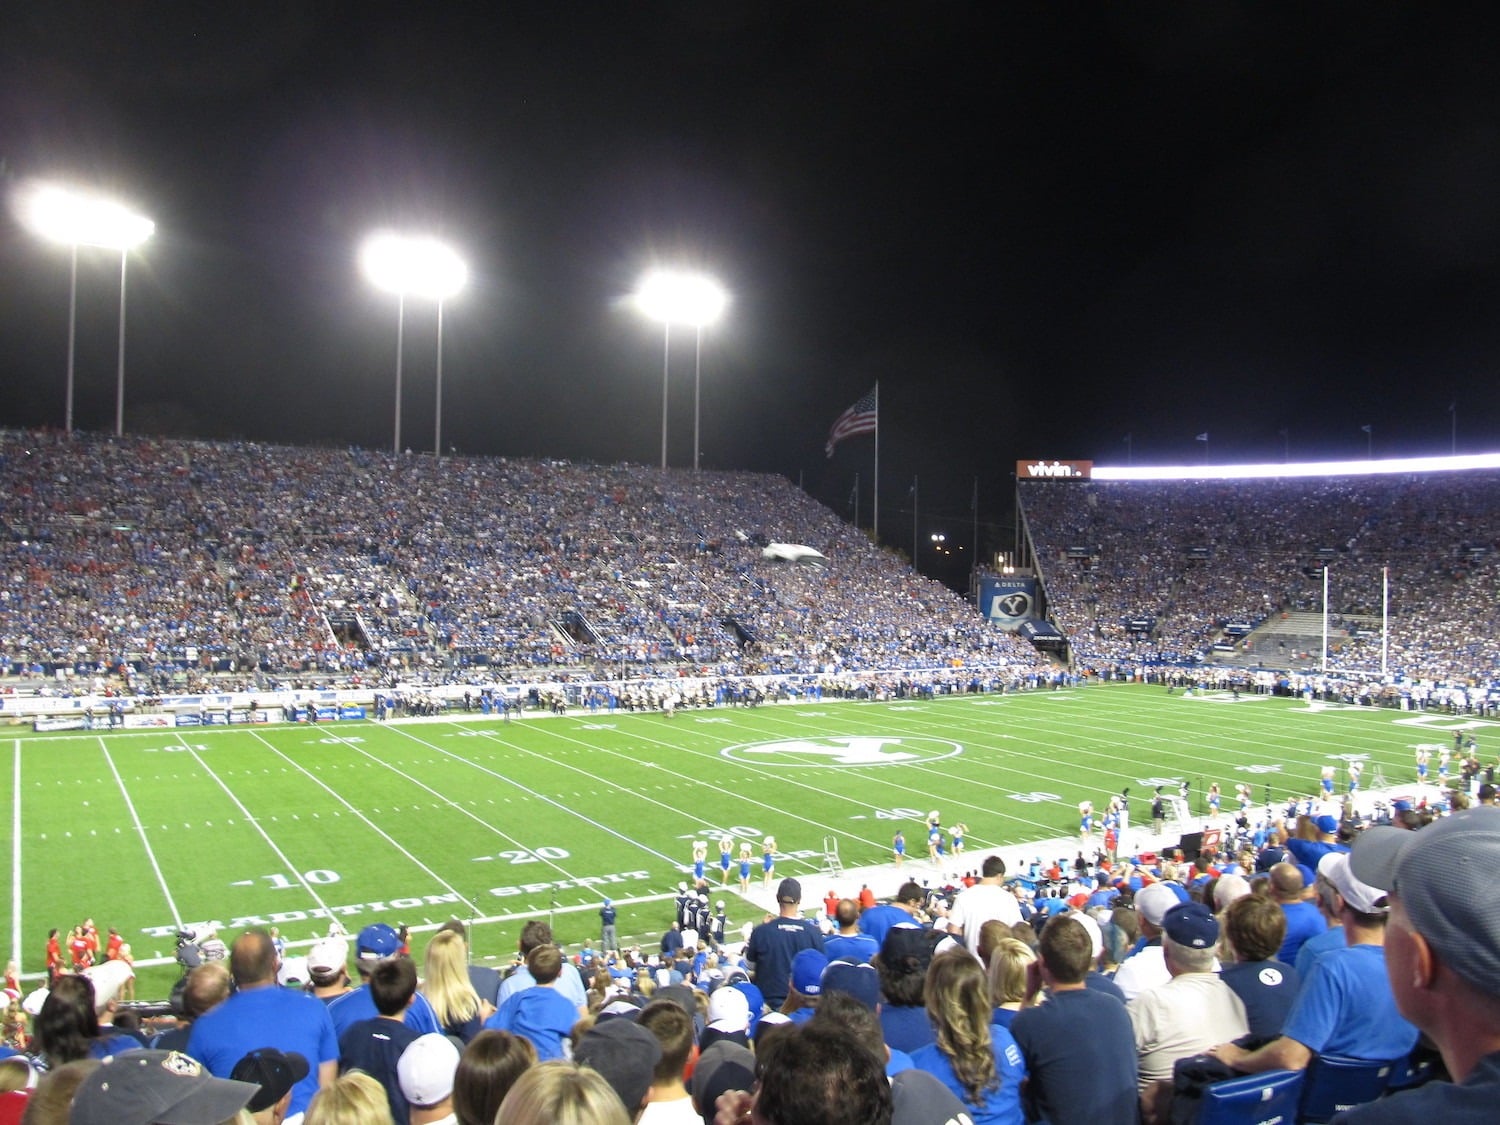 LaVell Edwards Stadium, Home Of The BYU Cougars. Photo Credit: Ken Lund - Under Creative Commons License